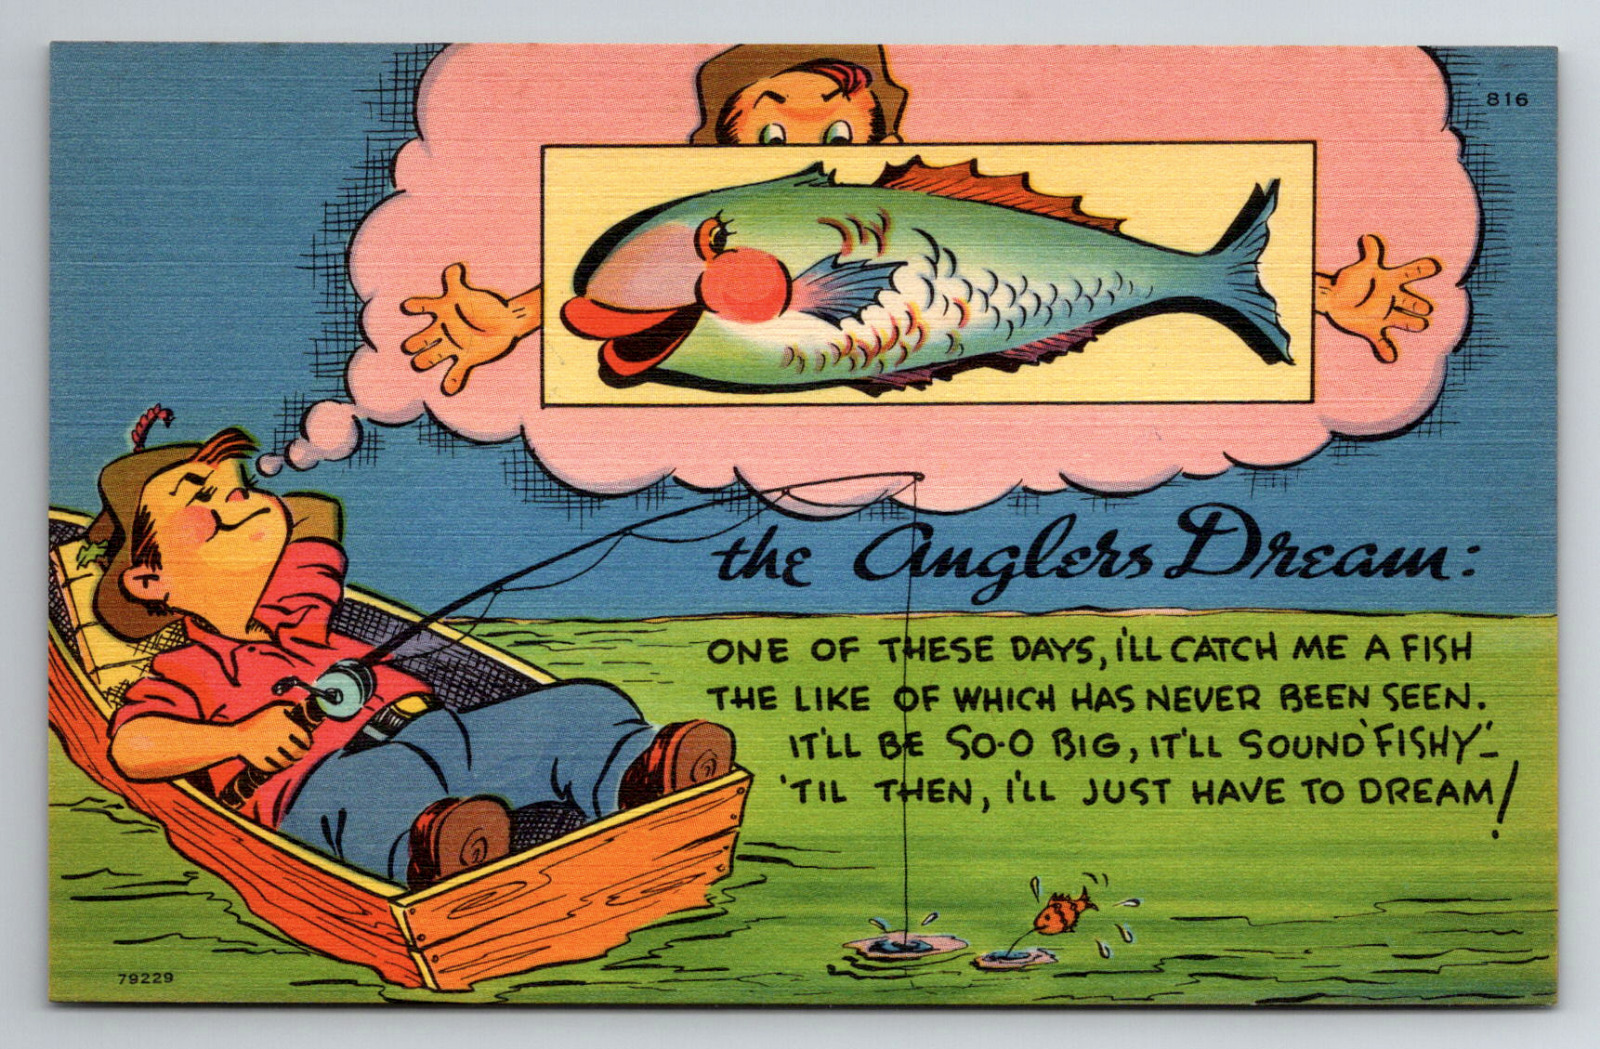 The Anglers Dream Fishing Comic Colorful Comedy Fish Vintage Linen Postcard